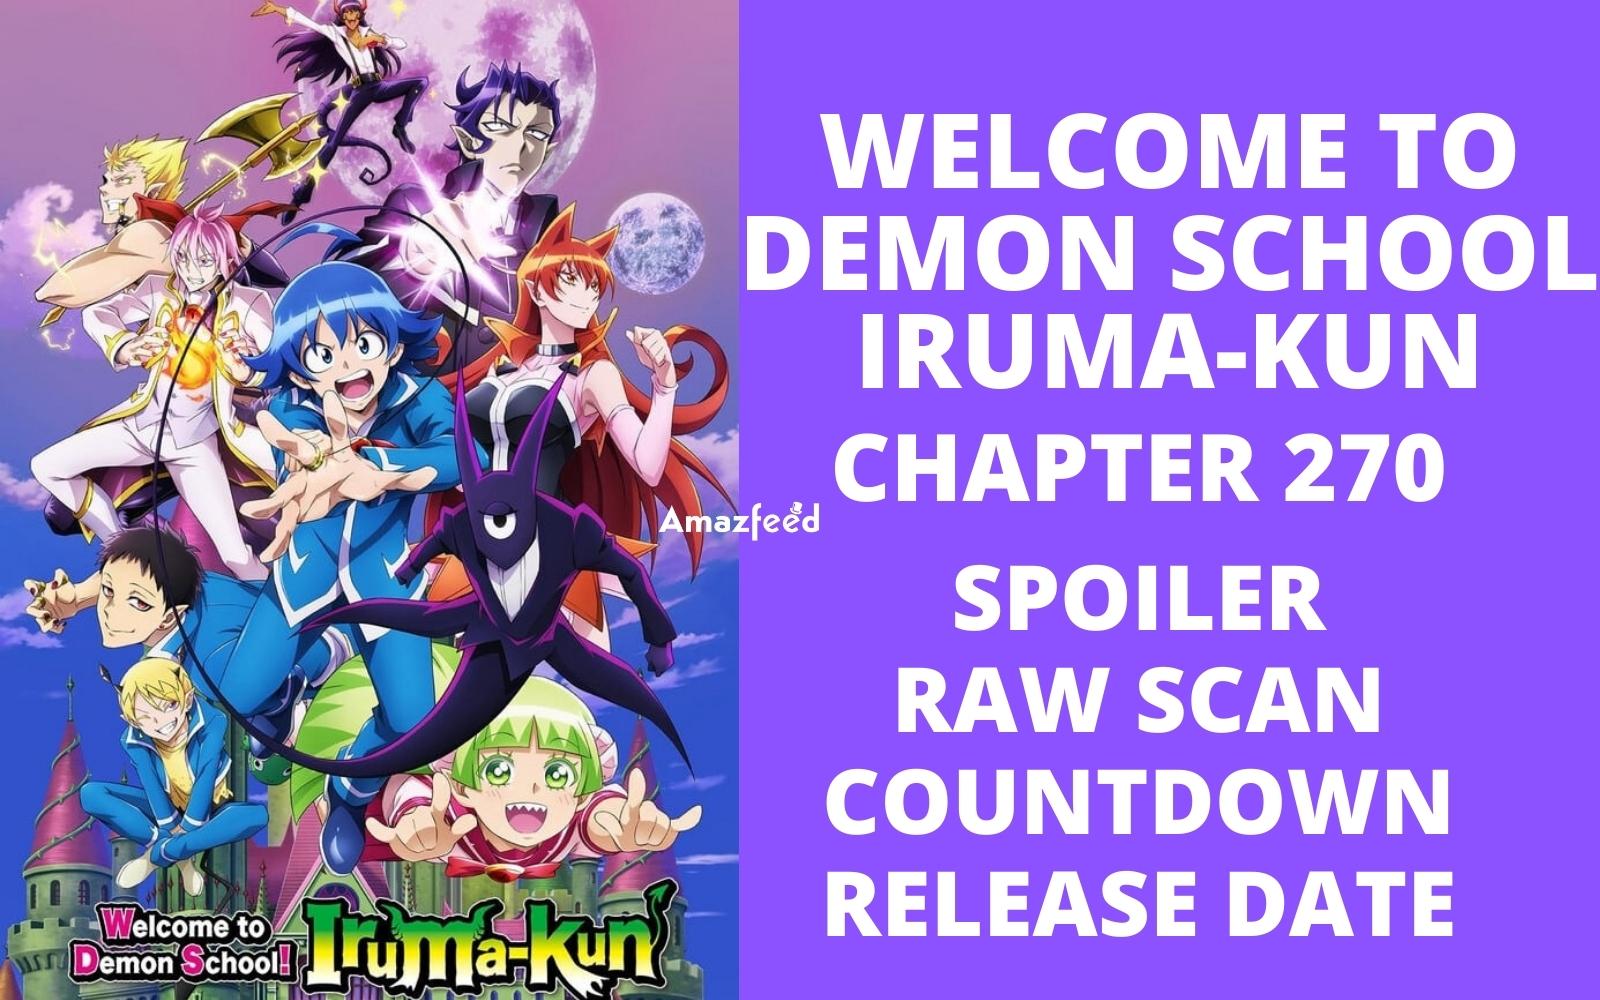 Welcome To Demon School Iruma-Kun Chapter 270 Spoiler, Release Date - Everything we know so far